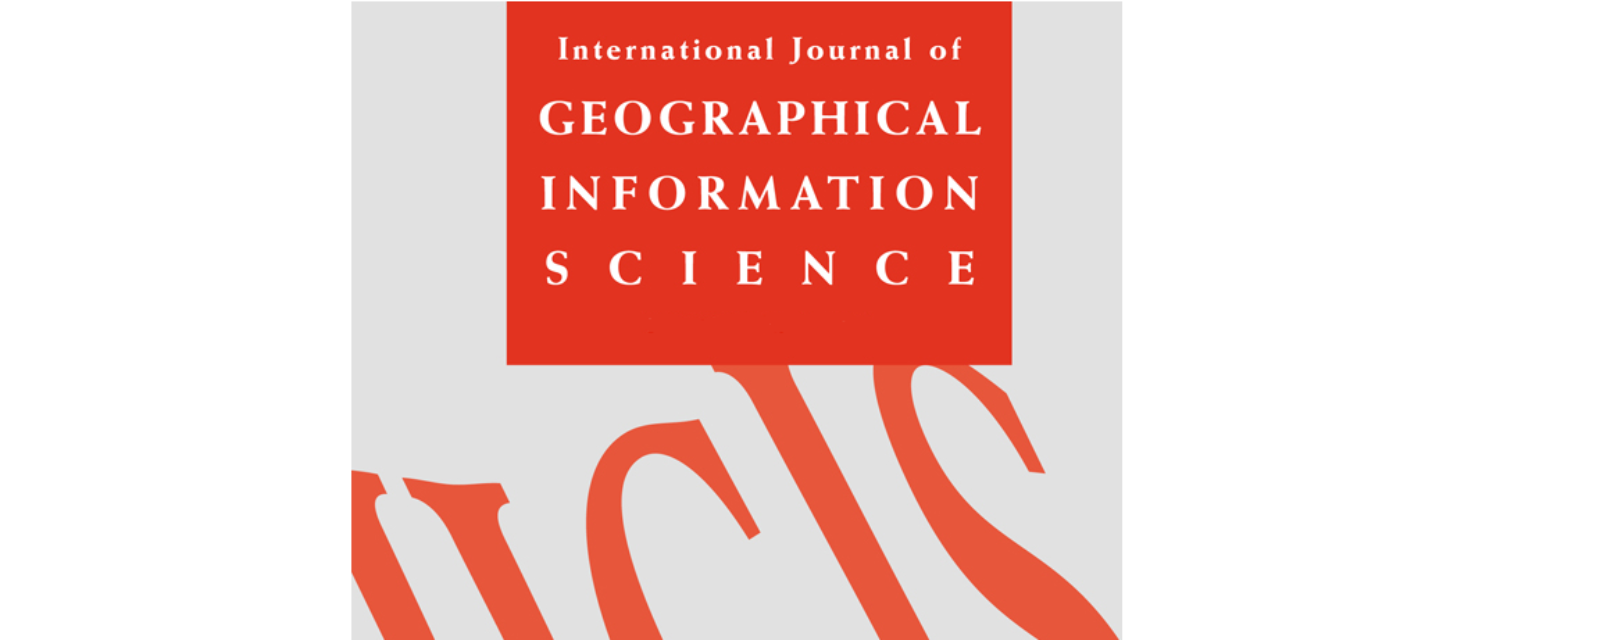 International Journal of Geographical Information Science 1